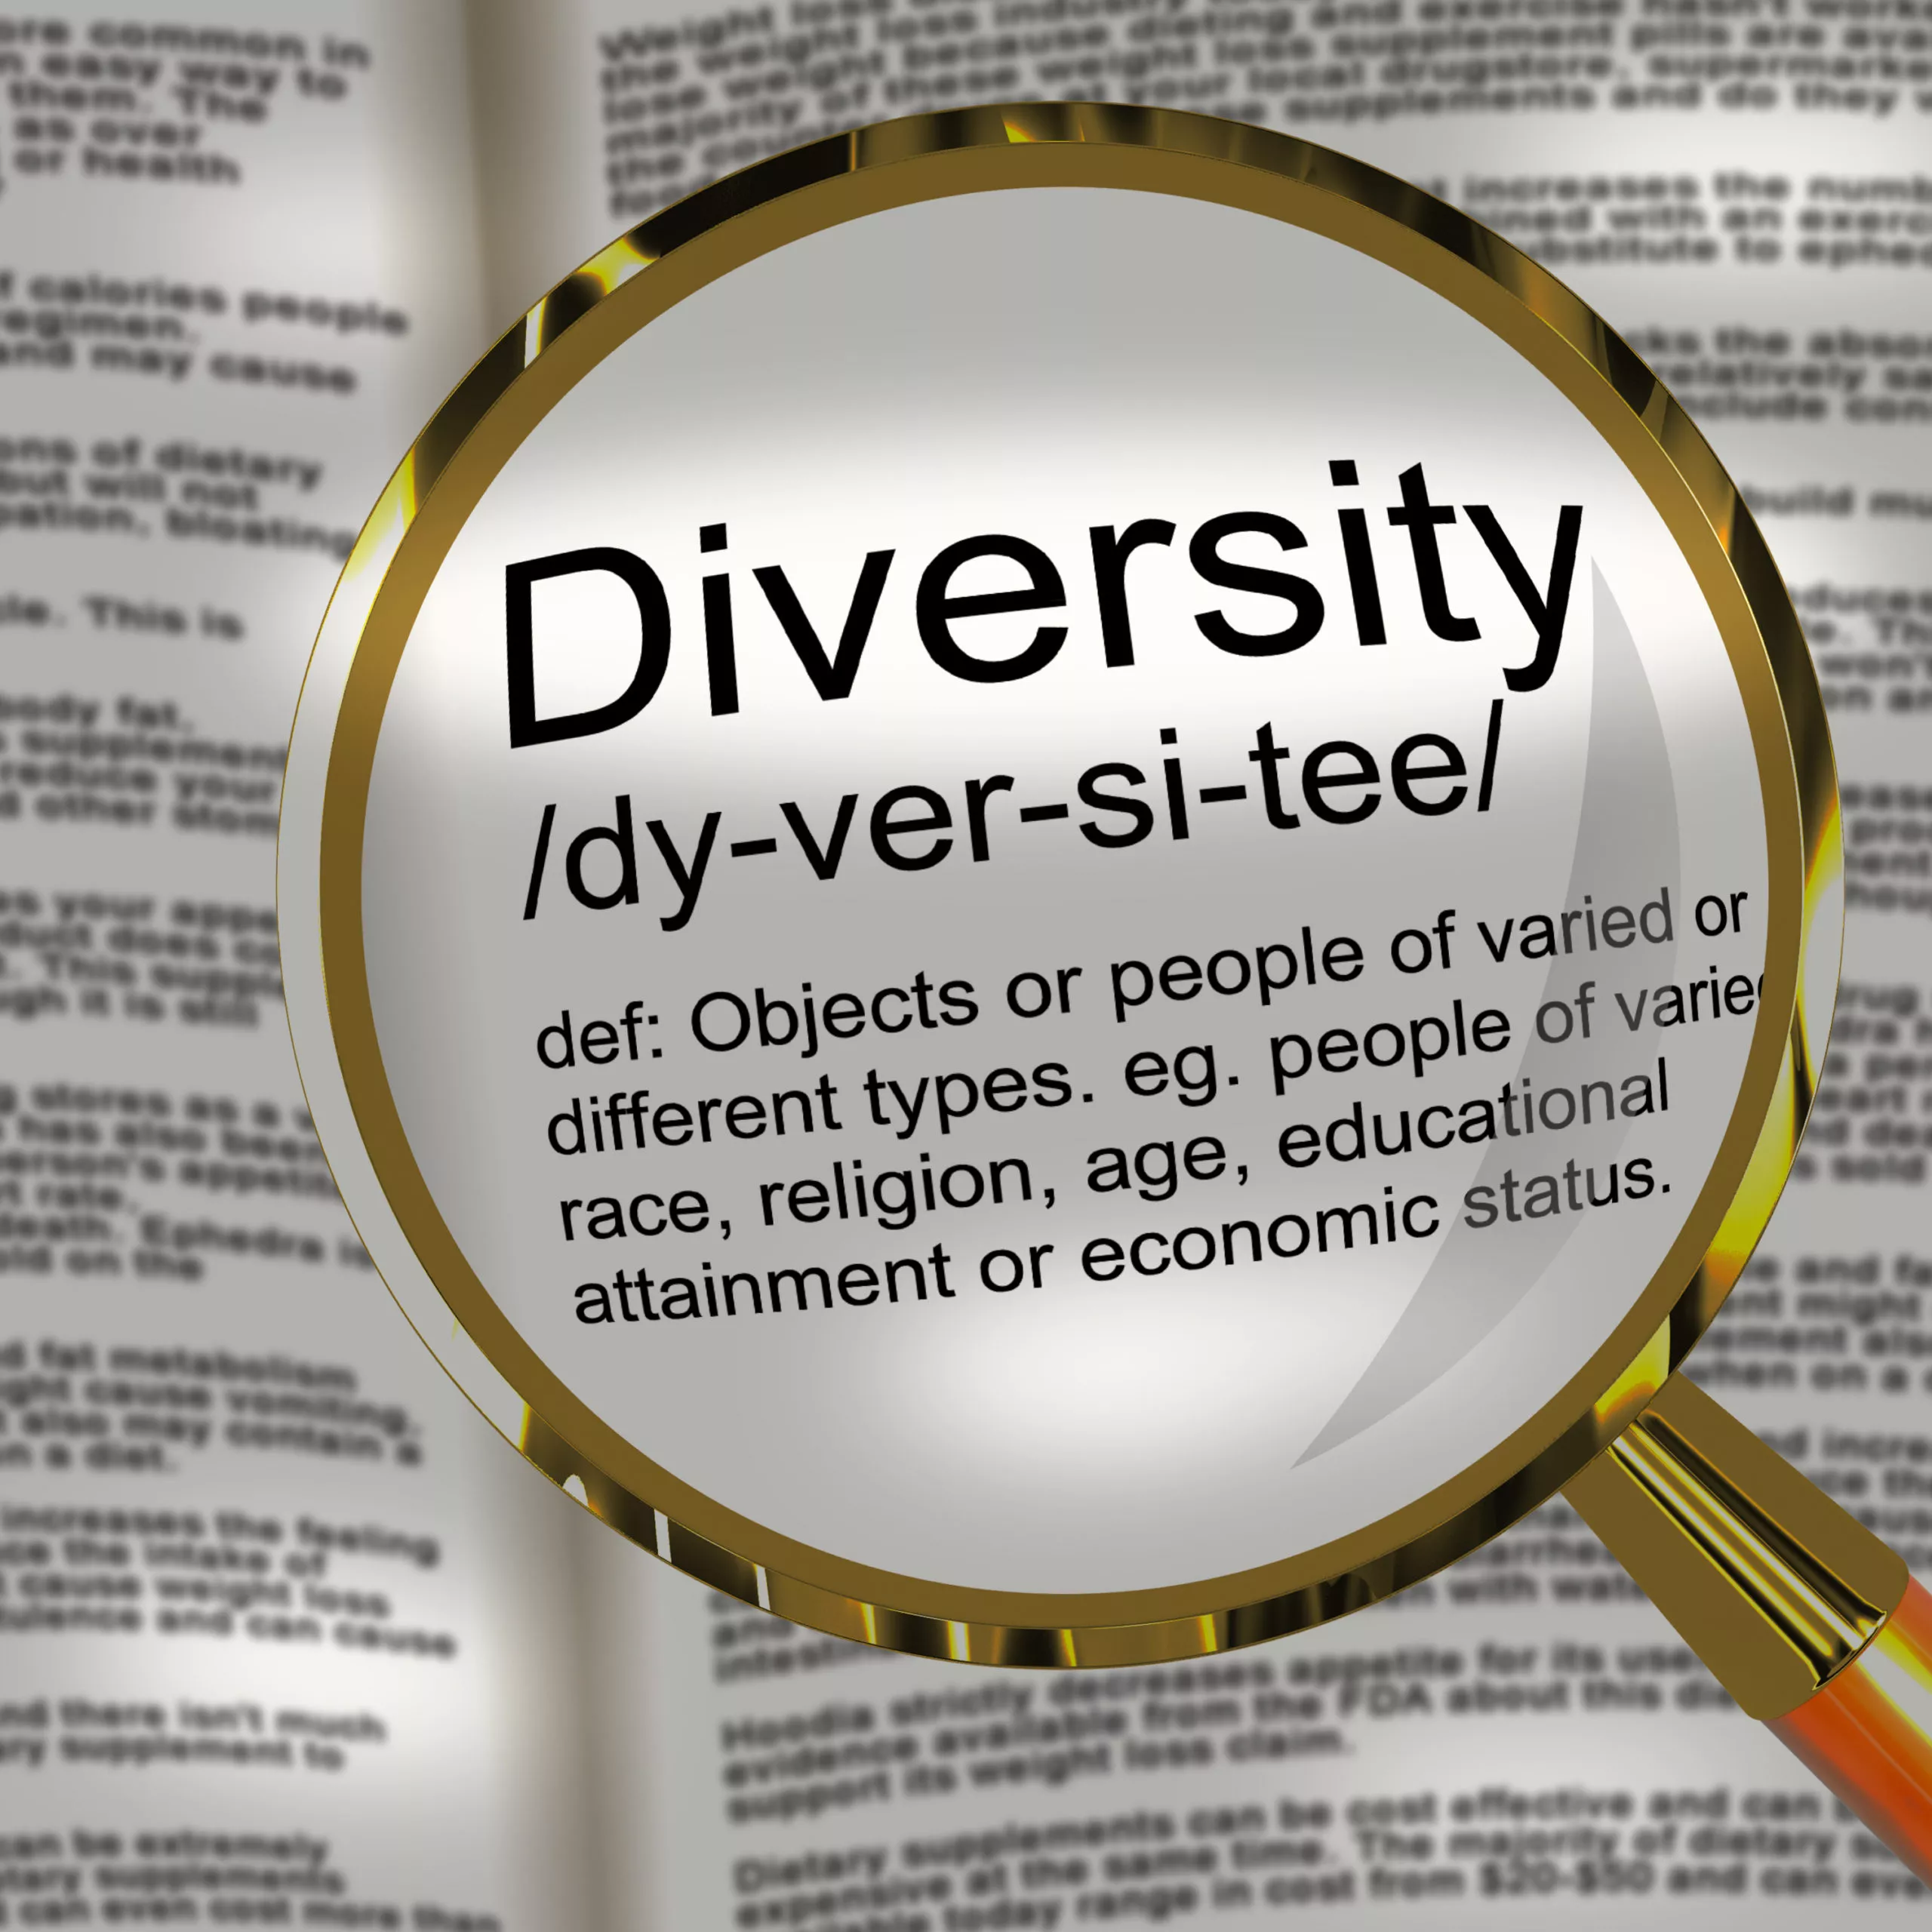 Diversity definition in the dictionary